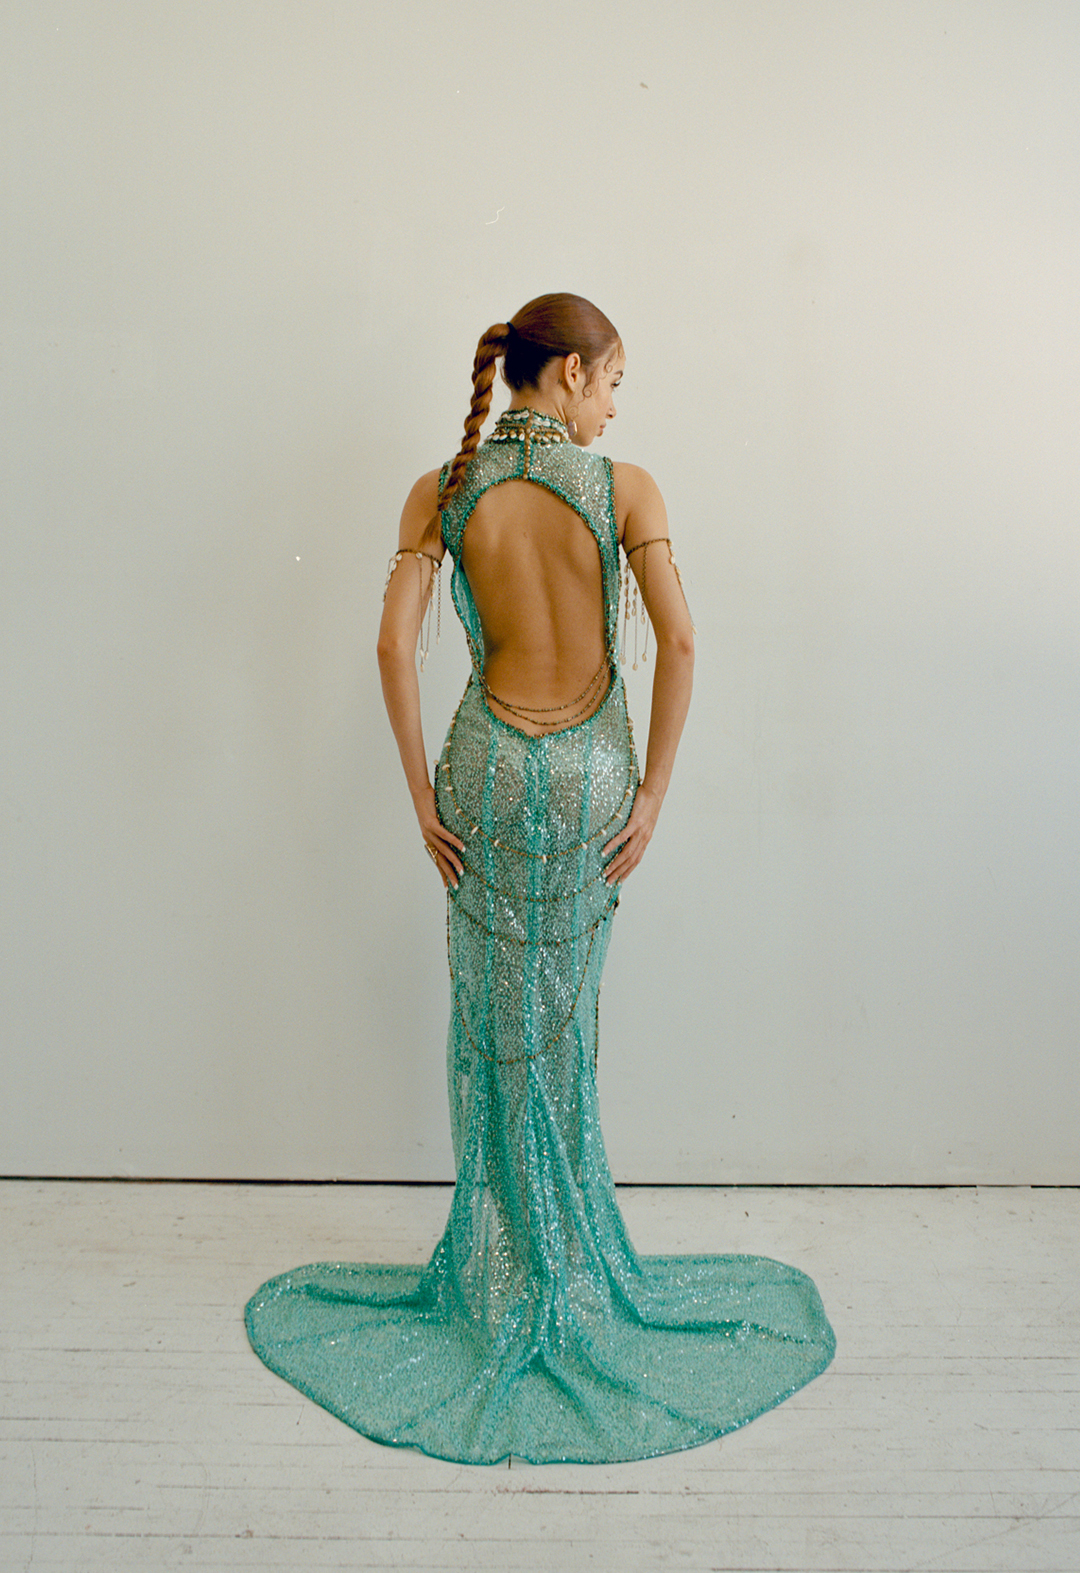 Back view of a model wearing a turquoise beaded dress. There is a big oval cut-out on the back.